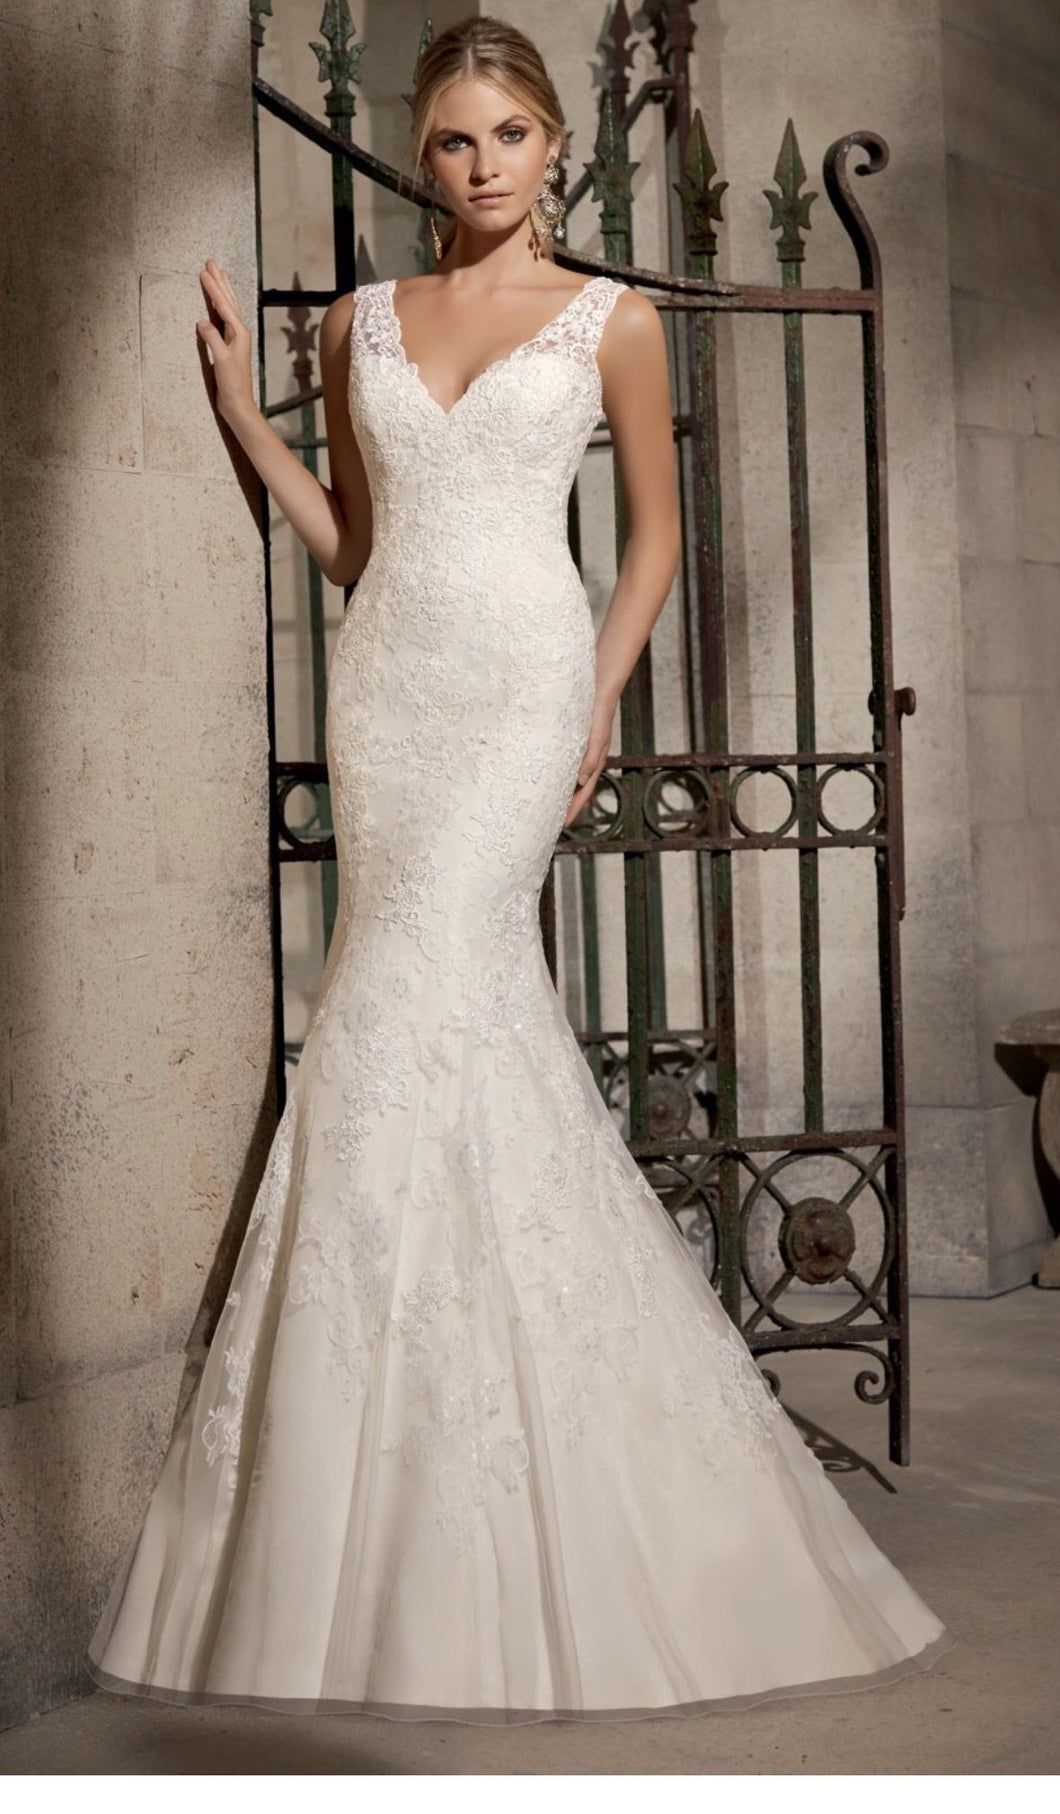 Mori Lee 'Perrie' size 14 new wedding dress front view on model